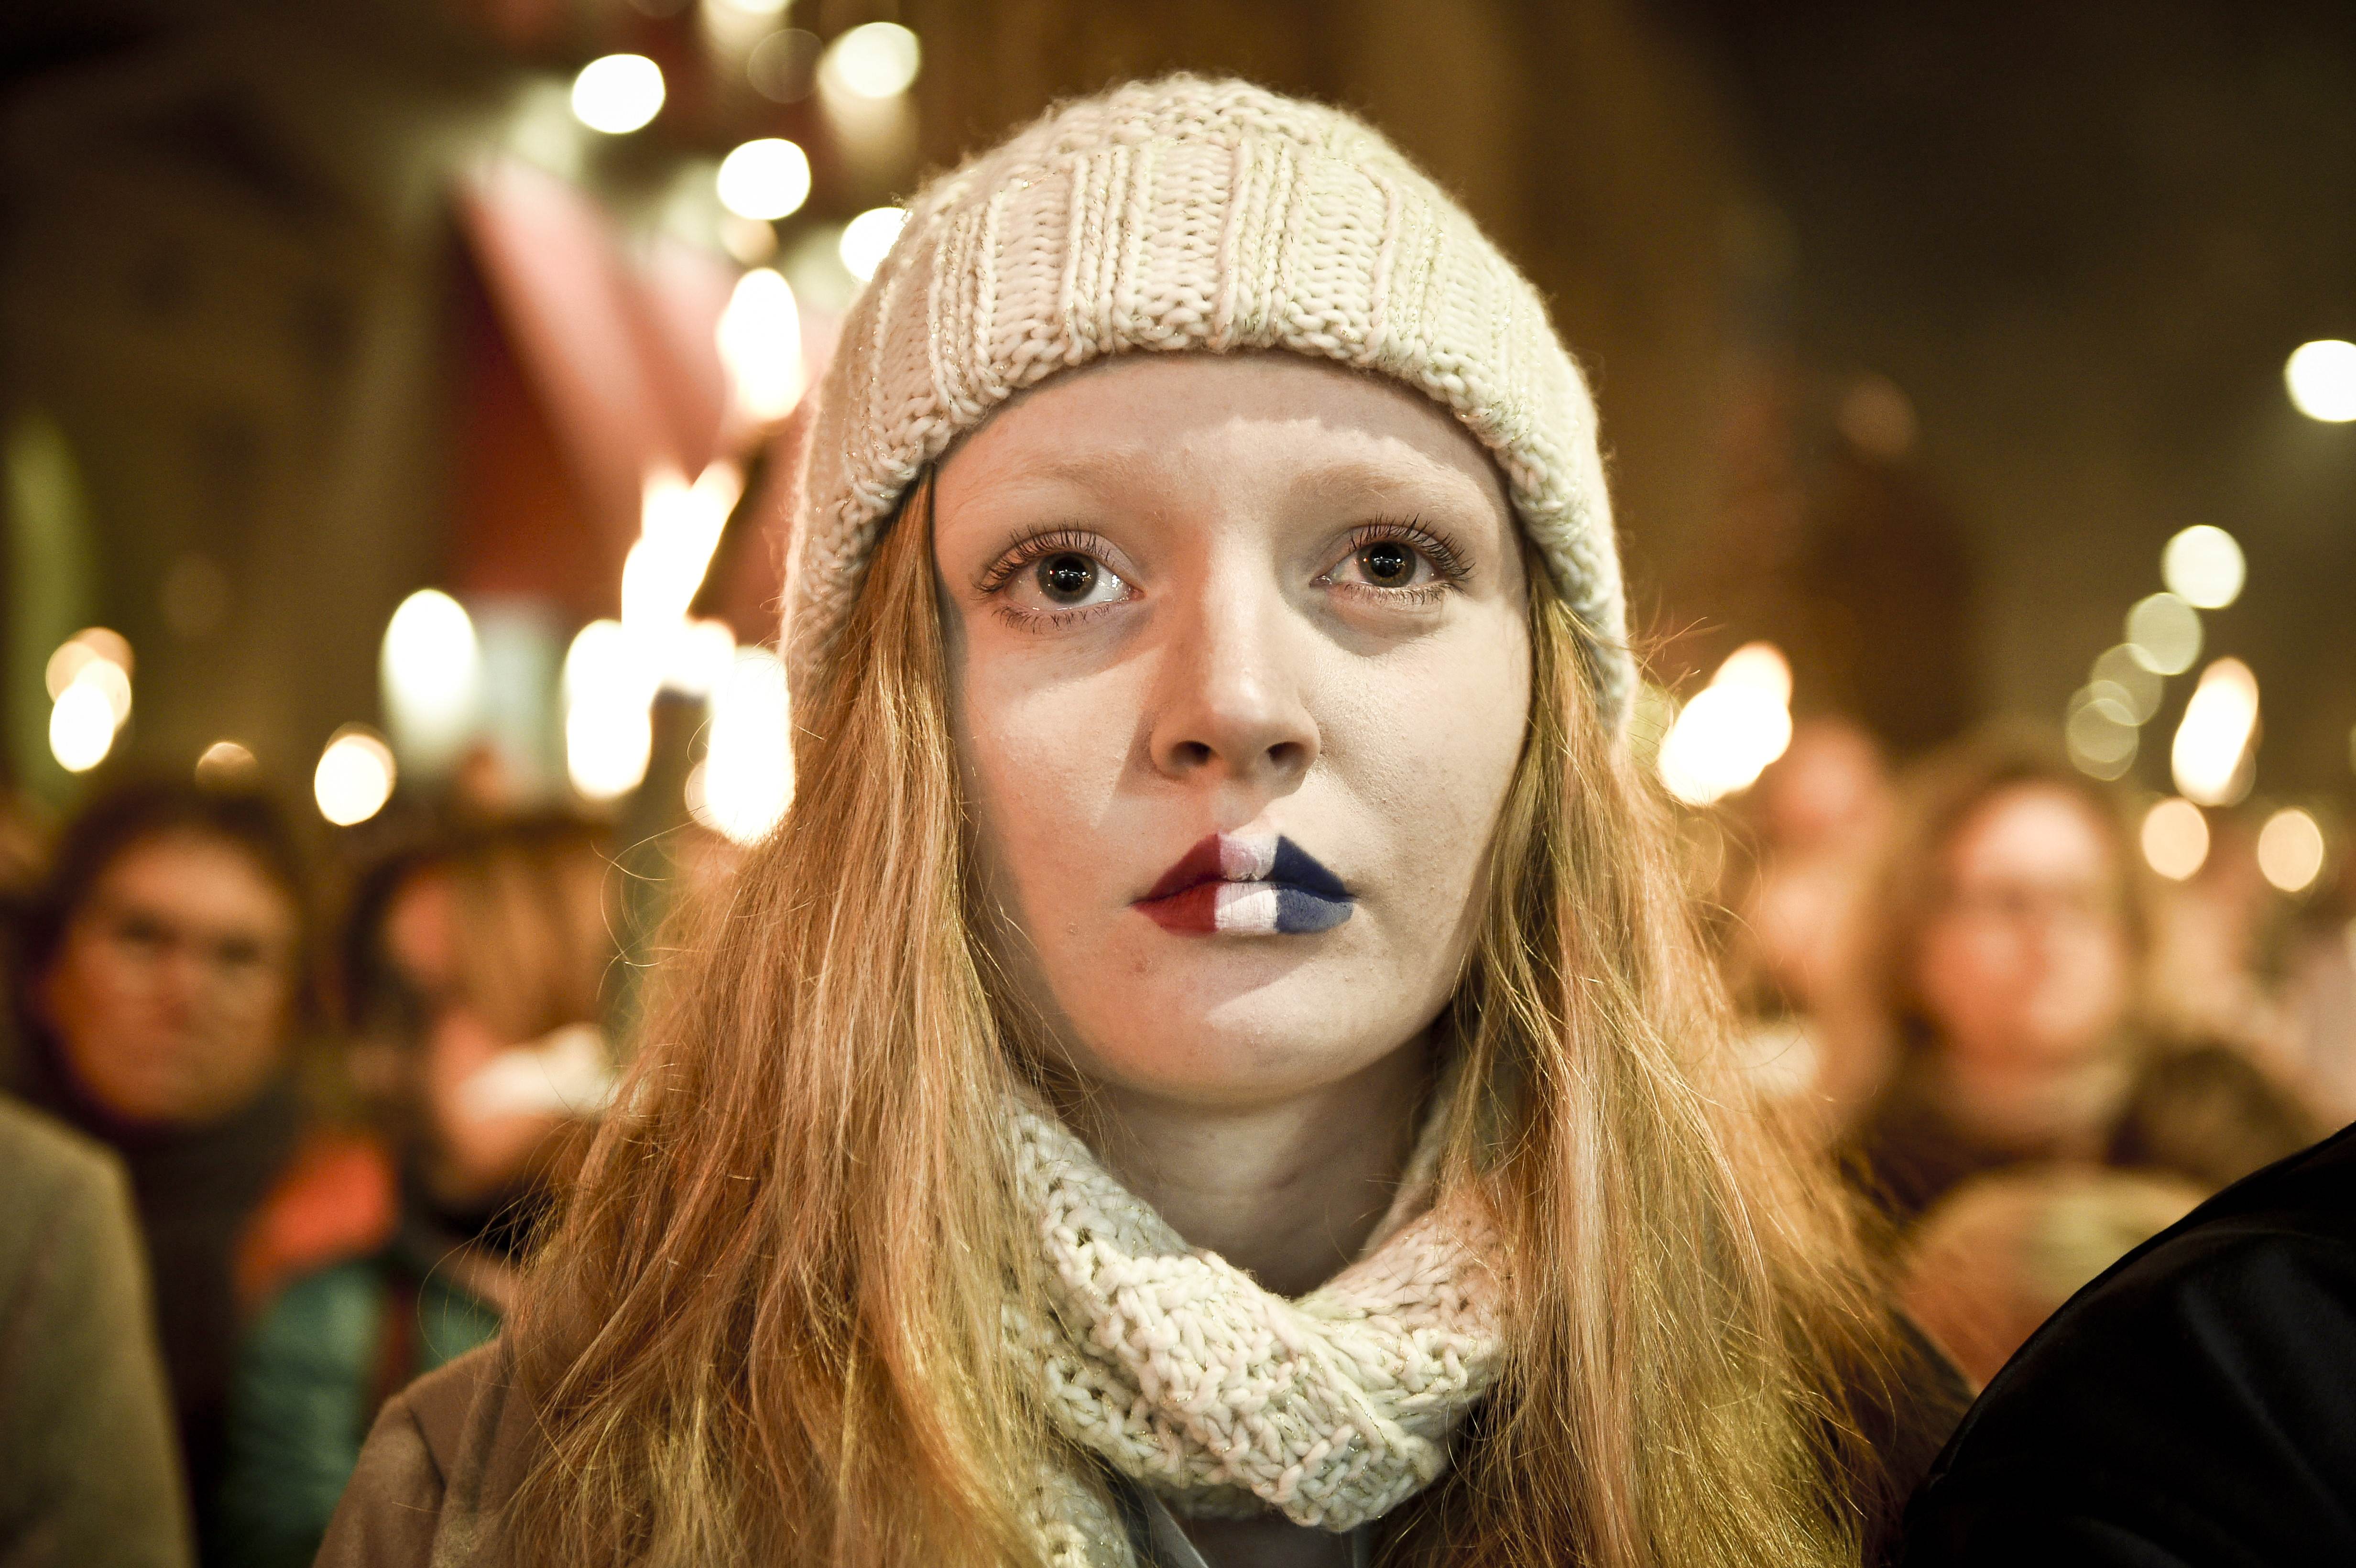 A girl with lips painted in French tricolor attends a vigil in memory of Paris attack victims in front of the French Embassy on November 15, 2015 in Copenhagen. Up to 20,000 people, among them Prime Minister Lars Lokke Rasmussen, gathered for a candlelight vigil at the gates of the French embassy in Copenhagen Sunday to mourn the victims of the Paris attacks, police said. AFP PHOTO / Nils Meilvang / SCANPIX DENMARK / NILS MEILVANG +++ DENMARK OUT